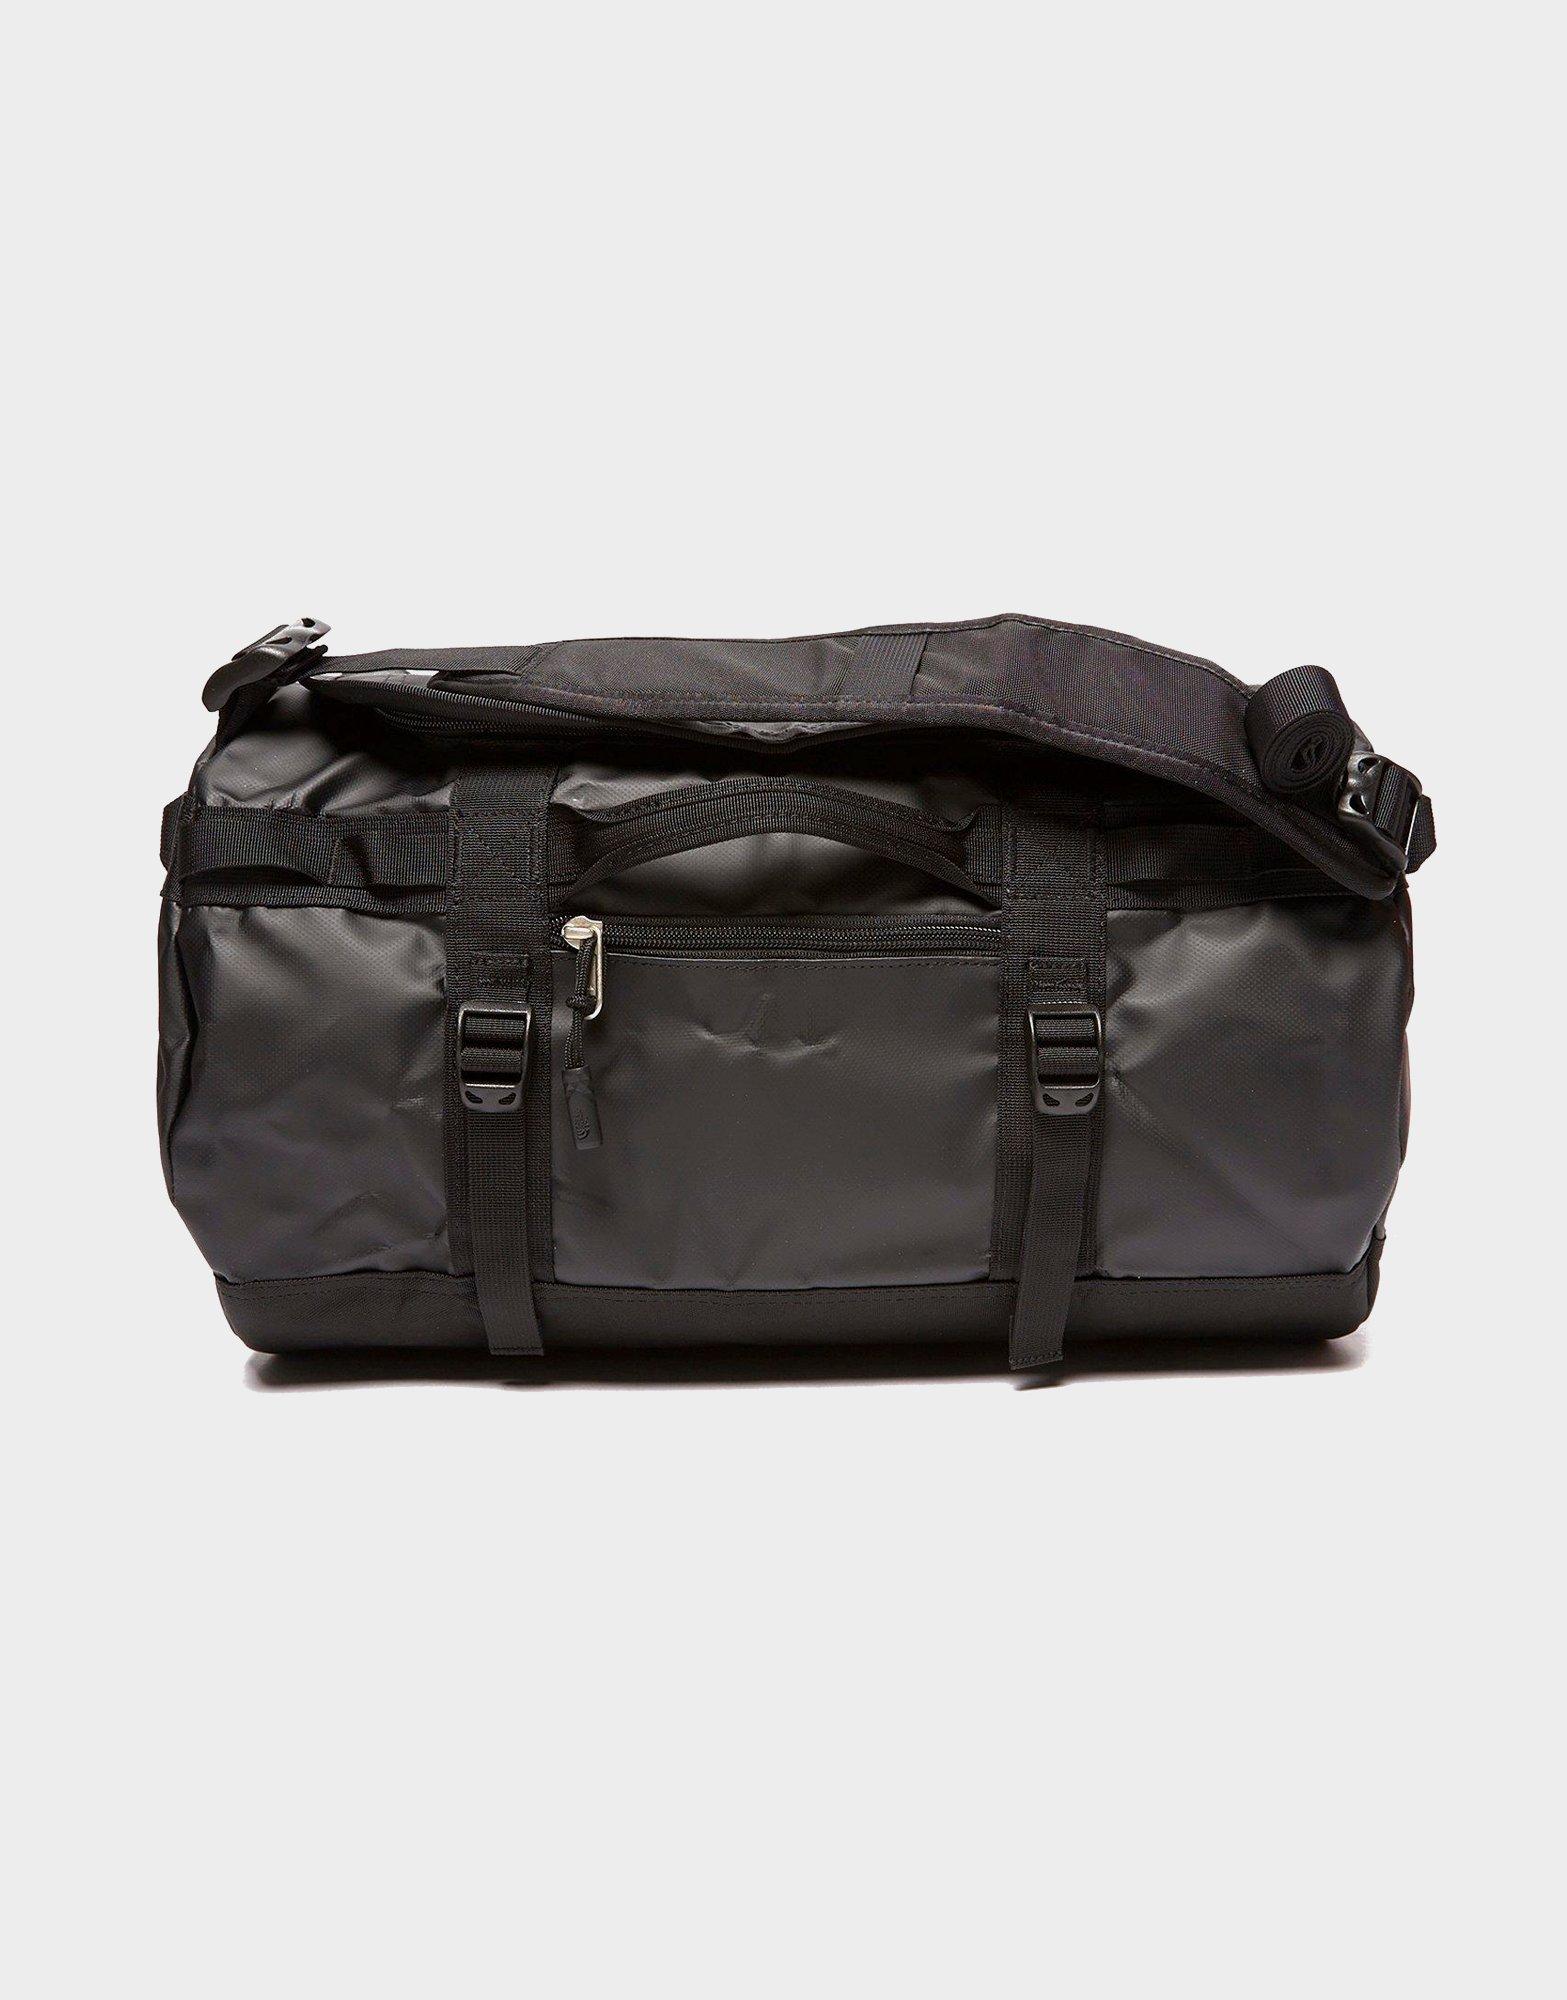 duffel bag the north face m